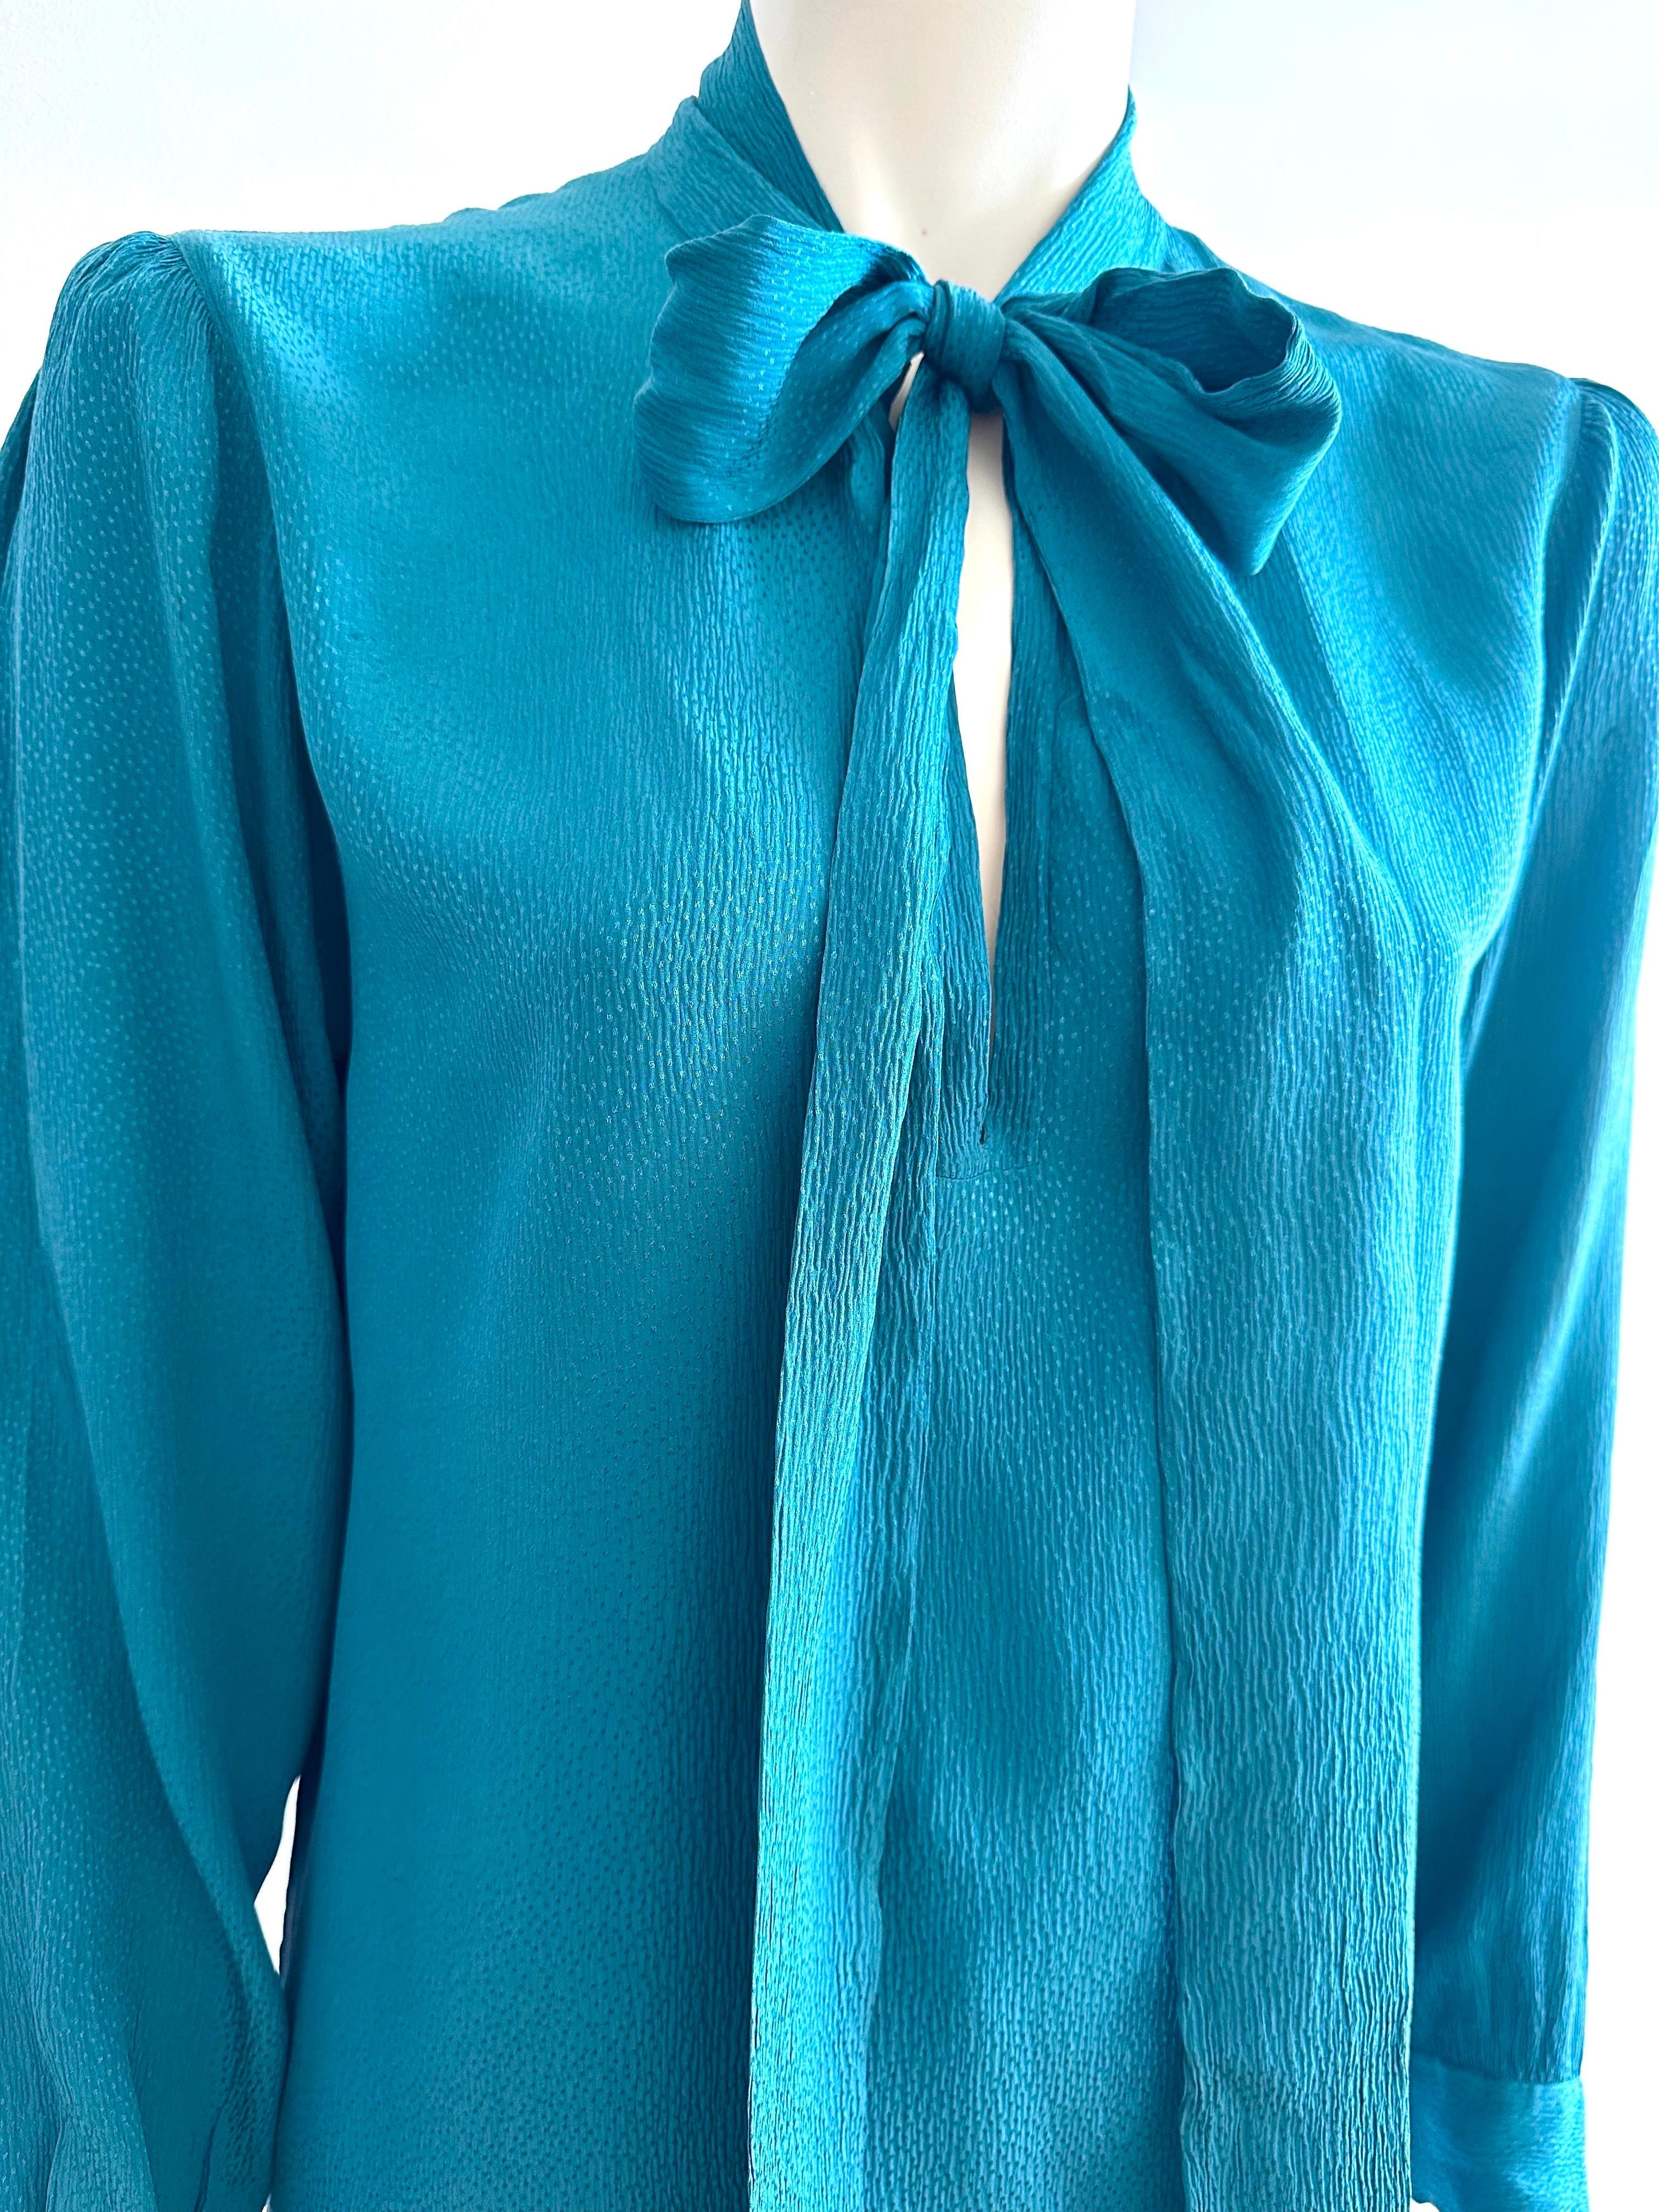 Yves saint Laurent Rive gauche lavallière collar blouse from the 1970s.
In duck-blue silk, this pretty blouse features a lavallière collar with an opening on the chest.
The shoulders are slightly gathered, the sleeves are long and closed with a